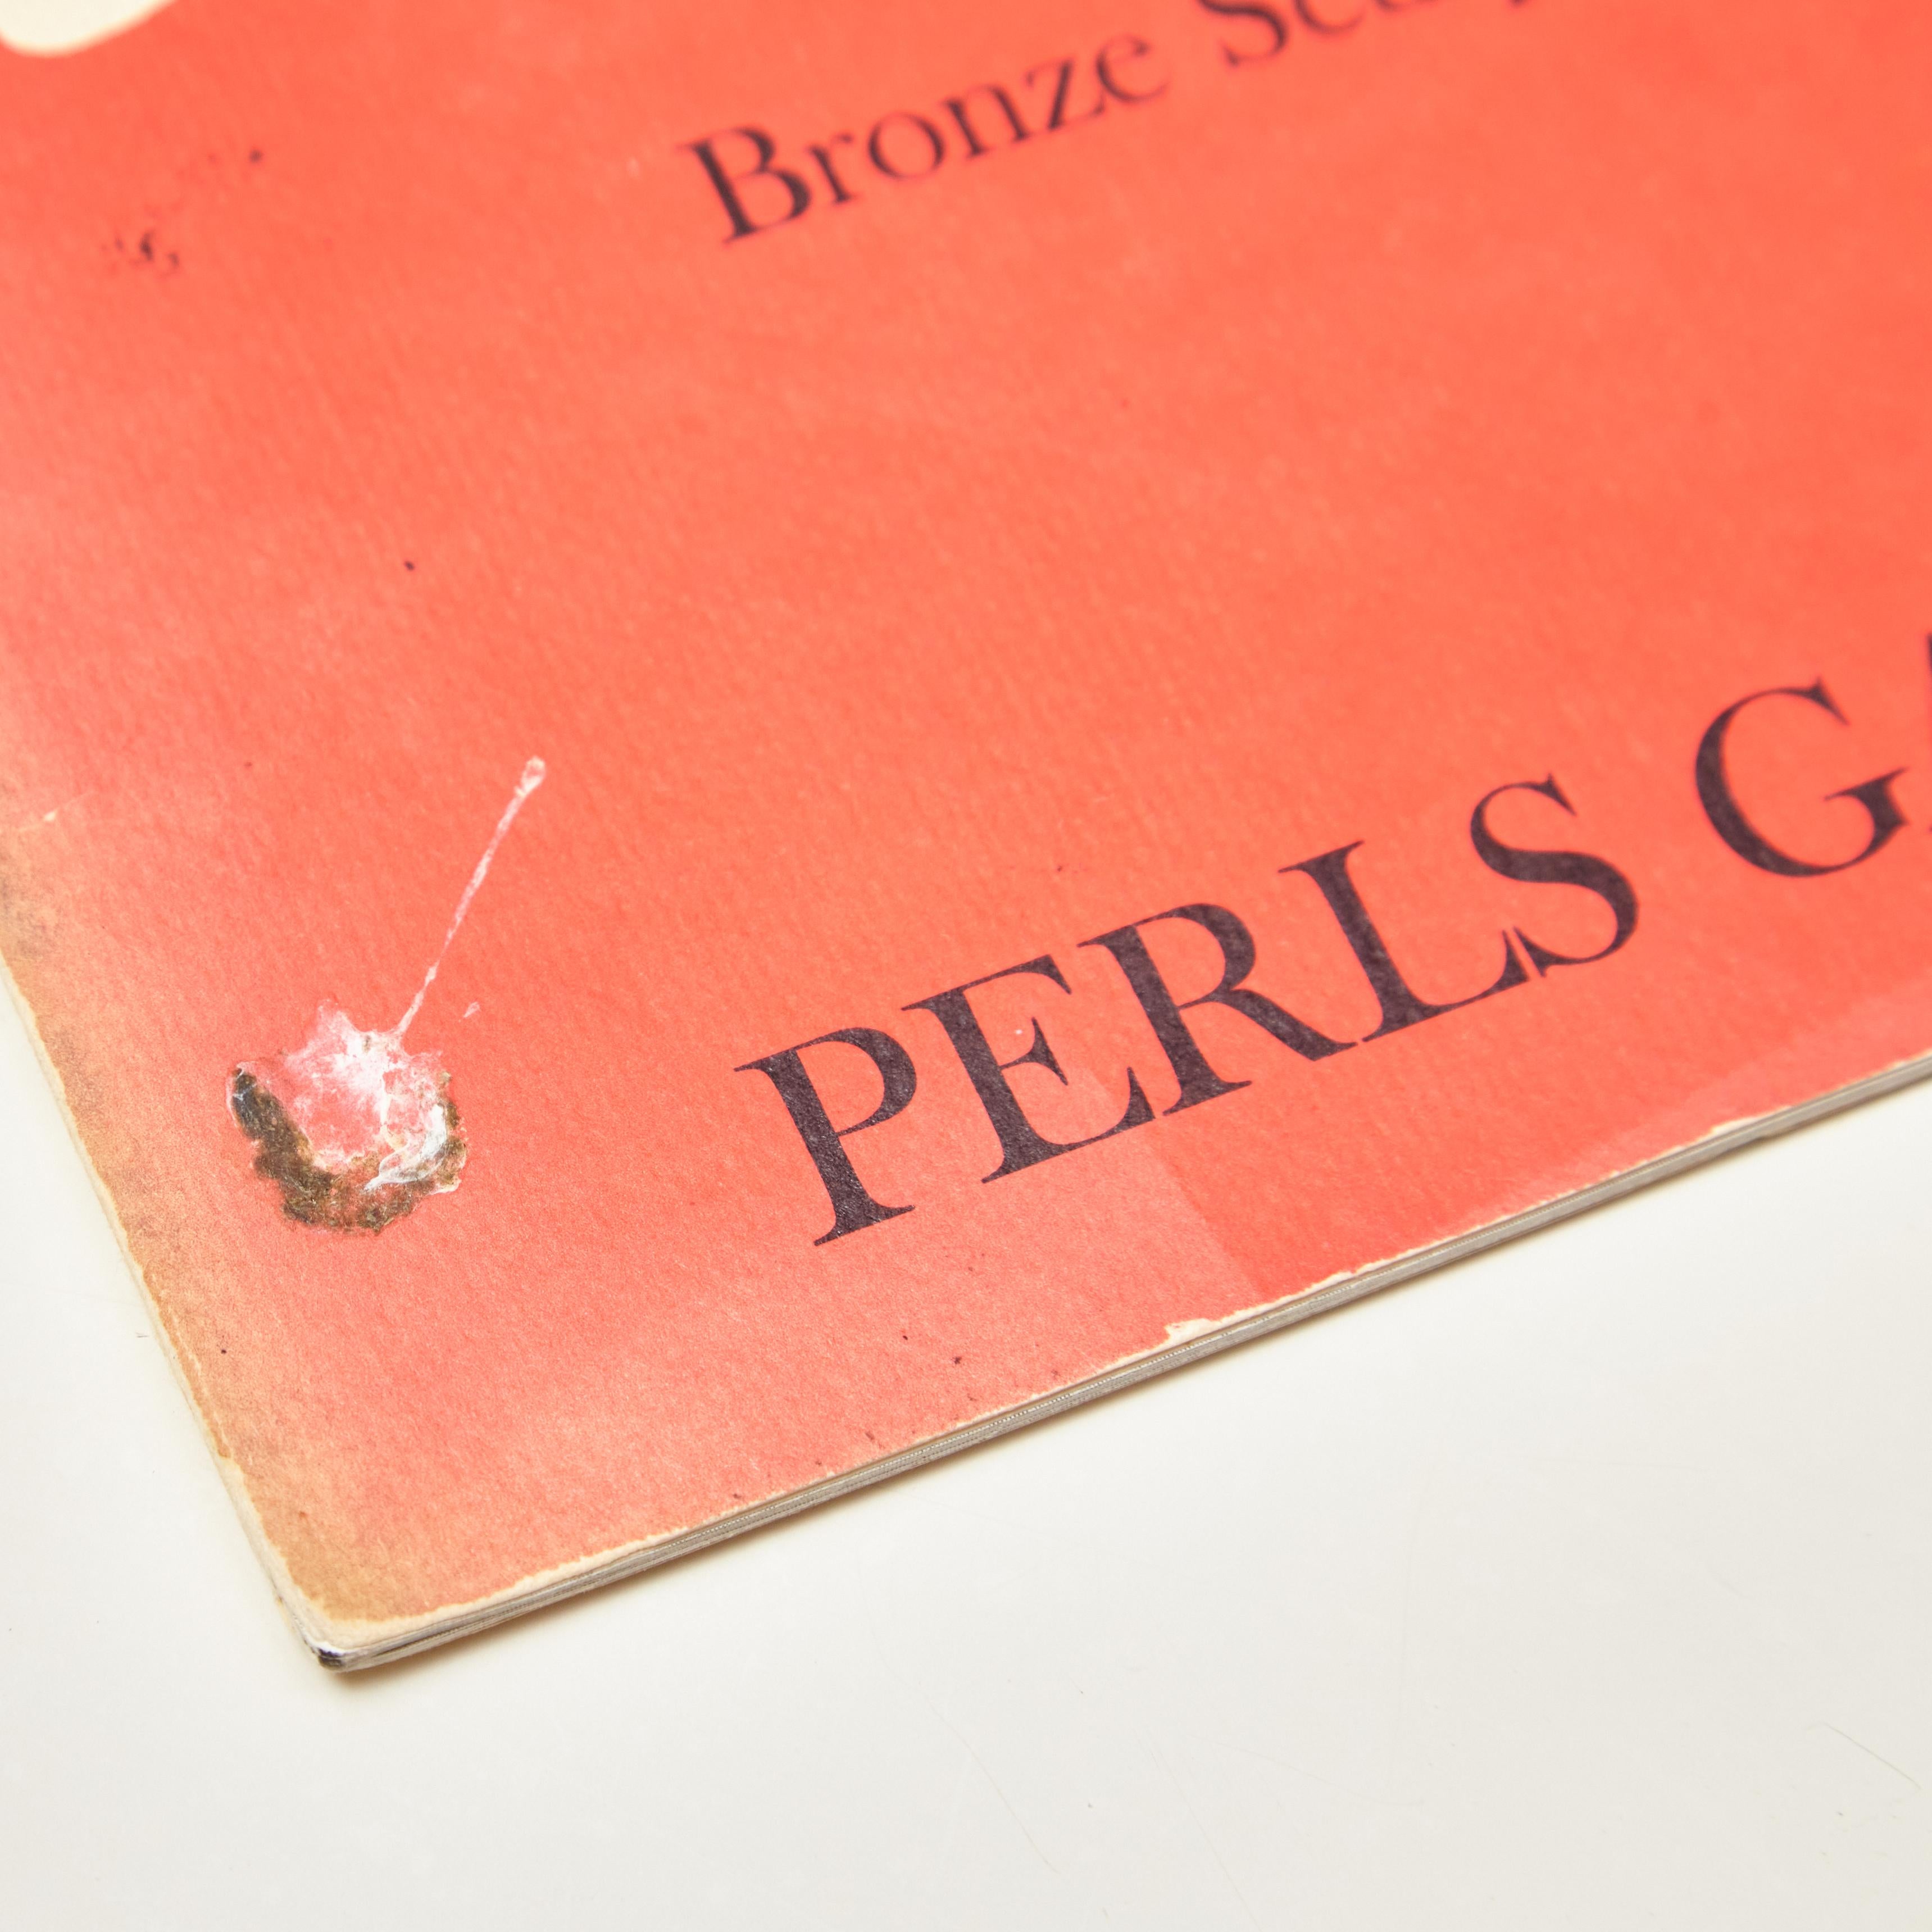 Bronze sculpture book by Alexander Calder for Perl's Galleries.

Manufactured in New York, circa 1950.

In good original condition, with consistent with age and use, preserving a beautiful patina with some scratches.

Dimensions: 
D 0.3 cm x